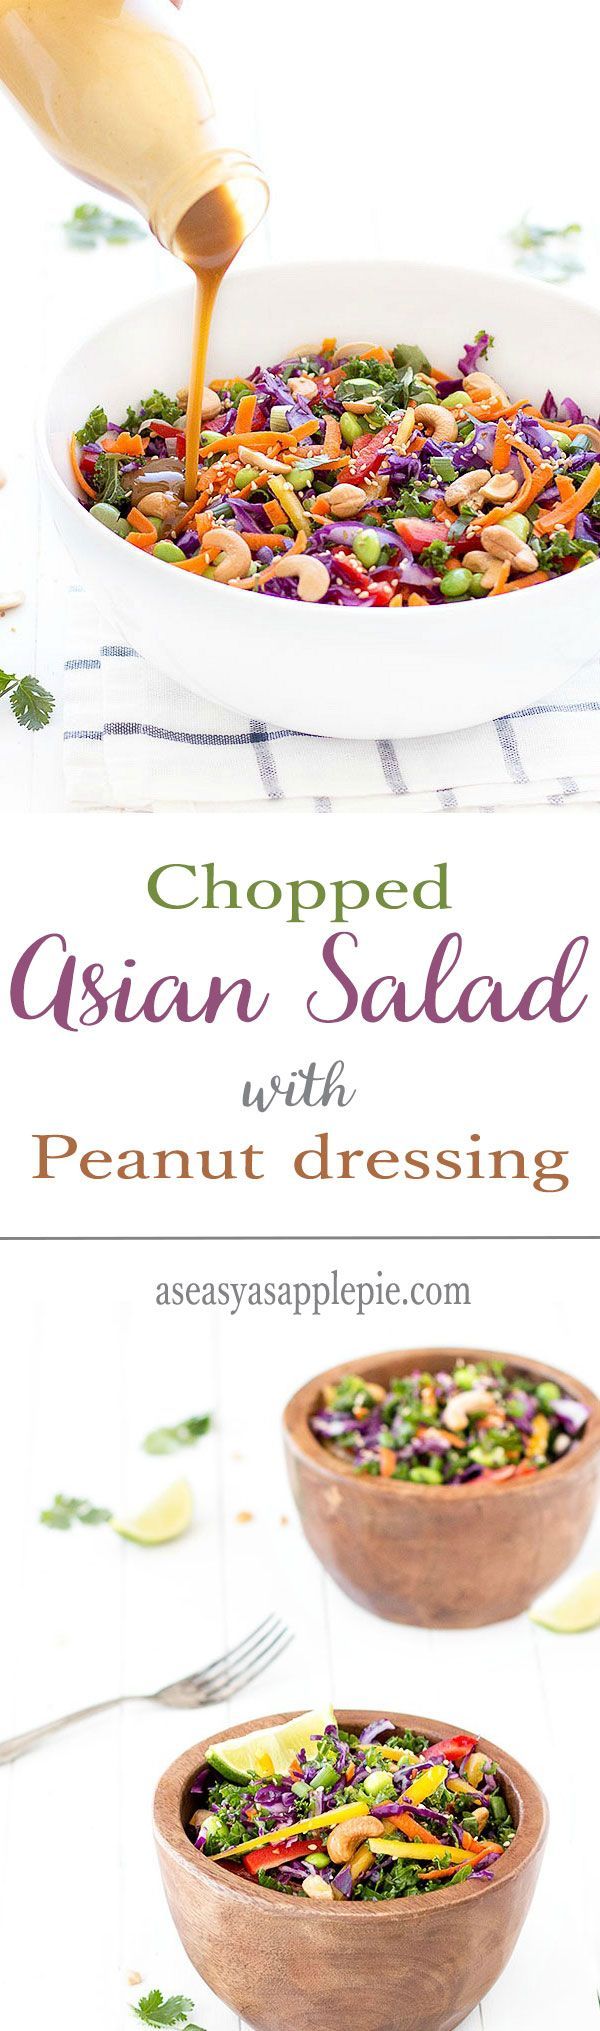 This chopped asian salad with peanut dressing is full of great ingredients that add flavor, texture, color and nutrition!